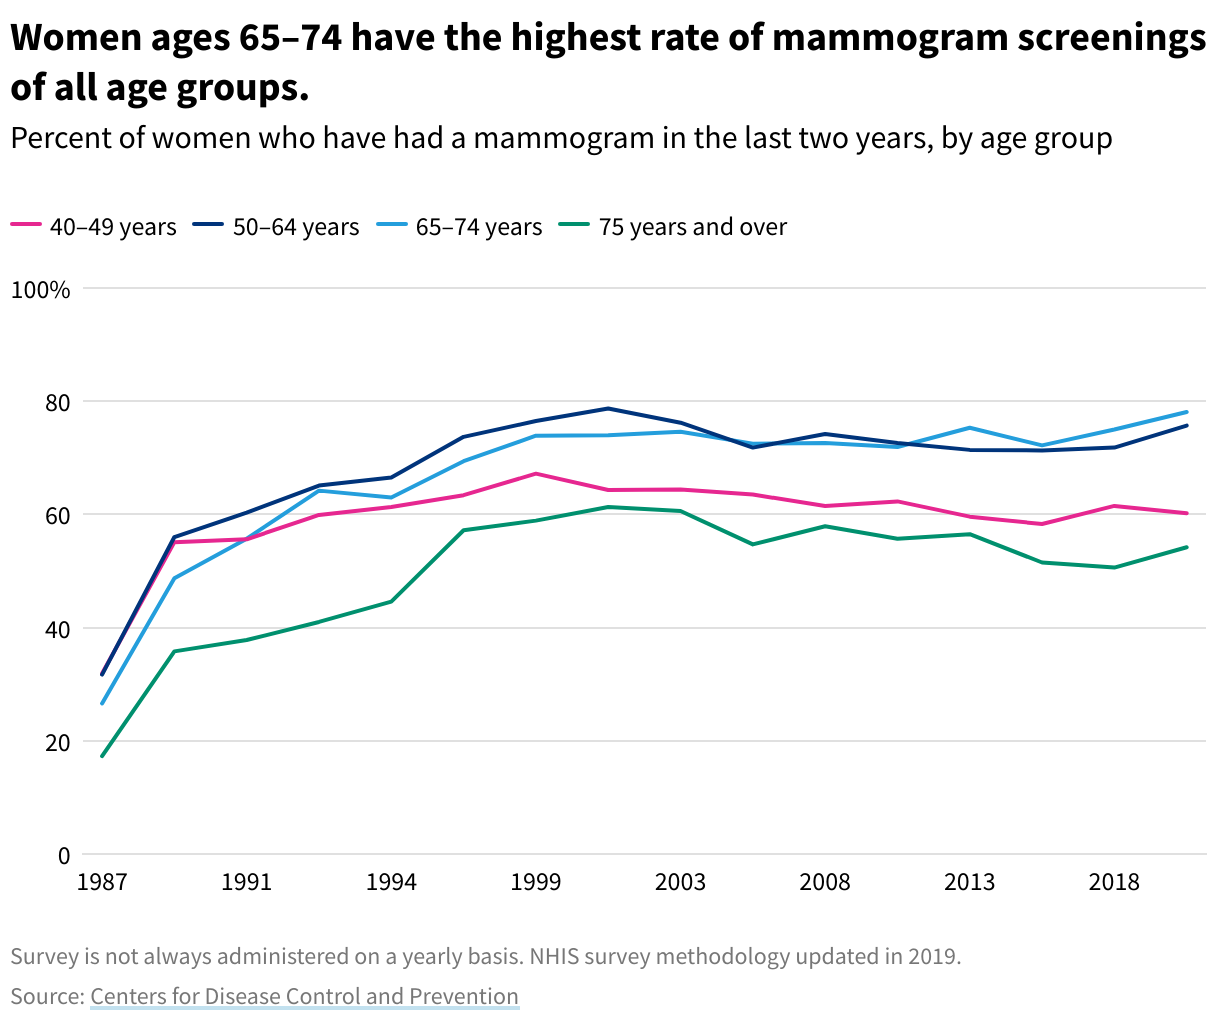 Line chart showing the rates of women who have had a mammogram screening in the last two years, broken out by age groups. Four lines represent screening rates for age ranges 40-49, 50-64, 65-74, and 75 and older